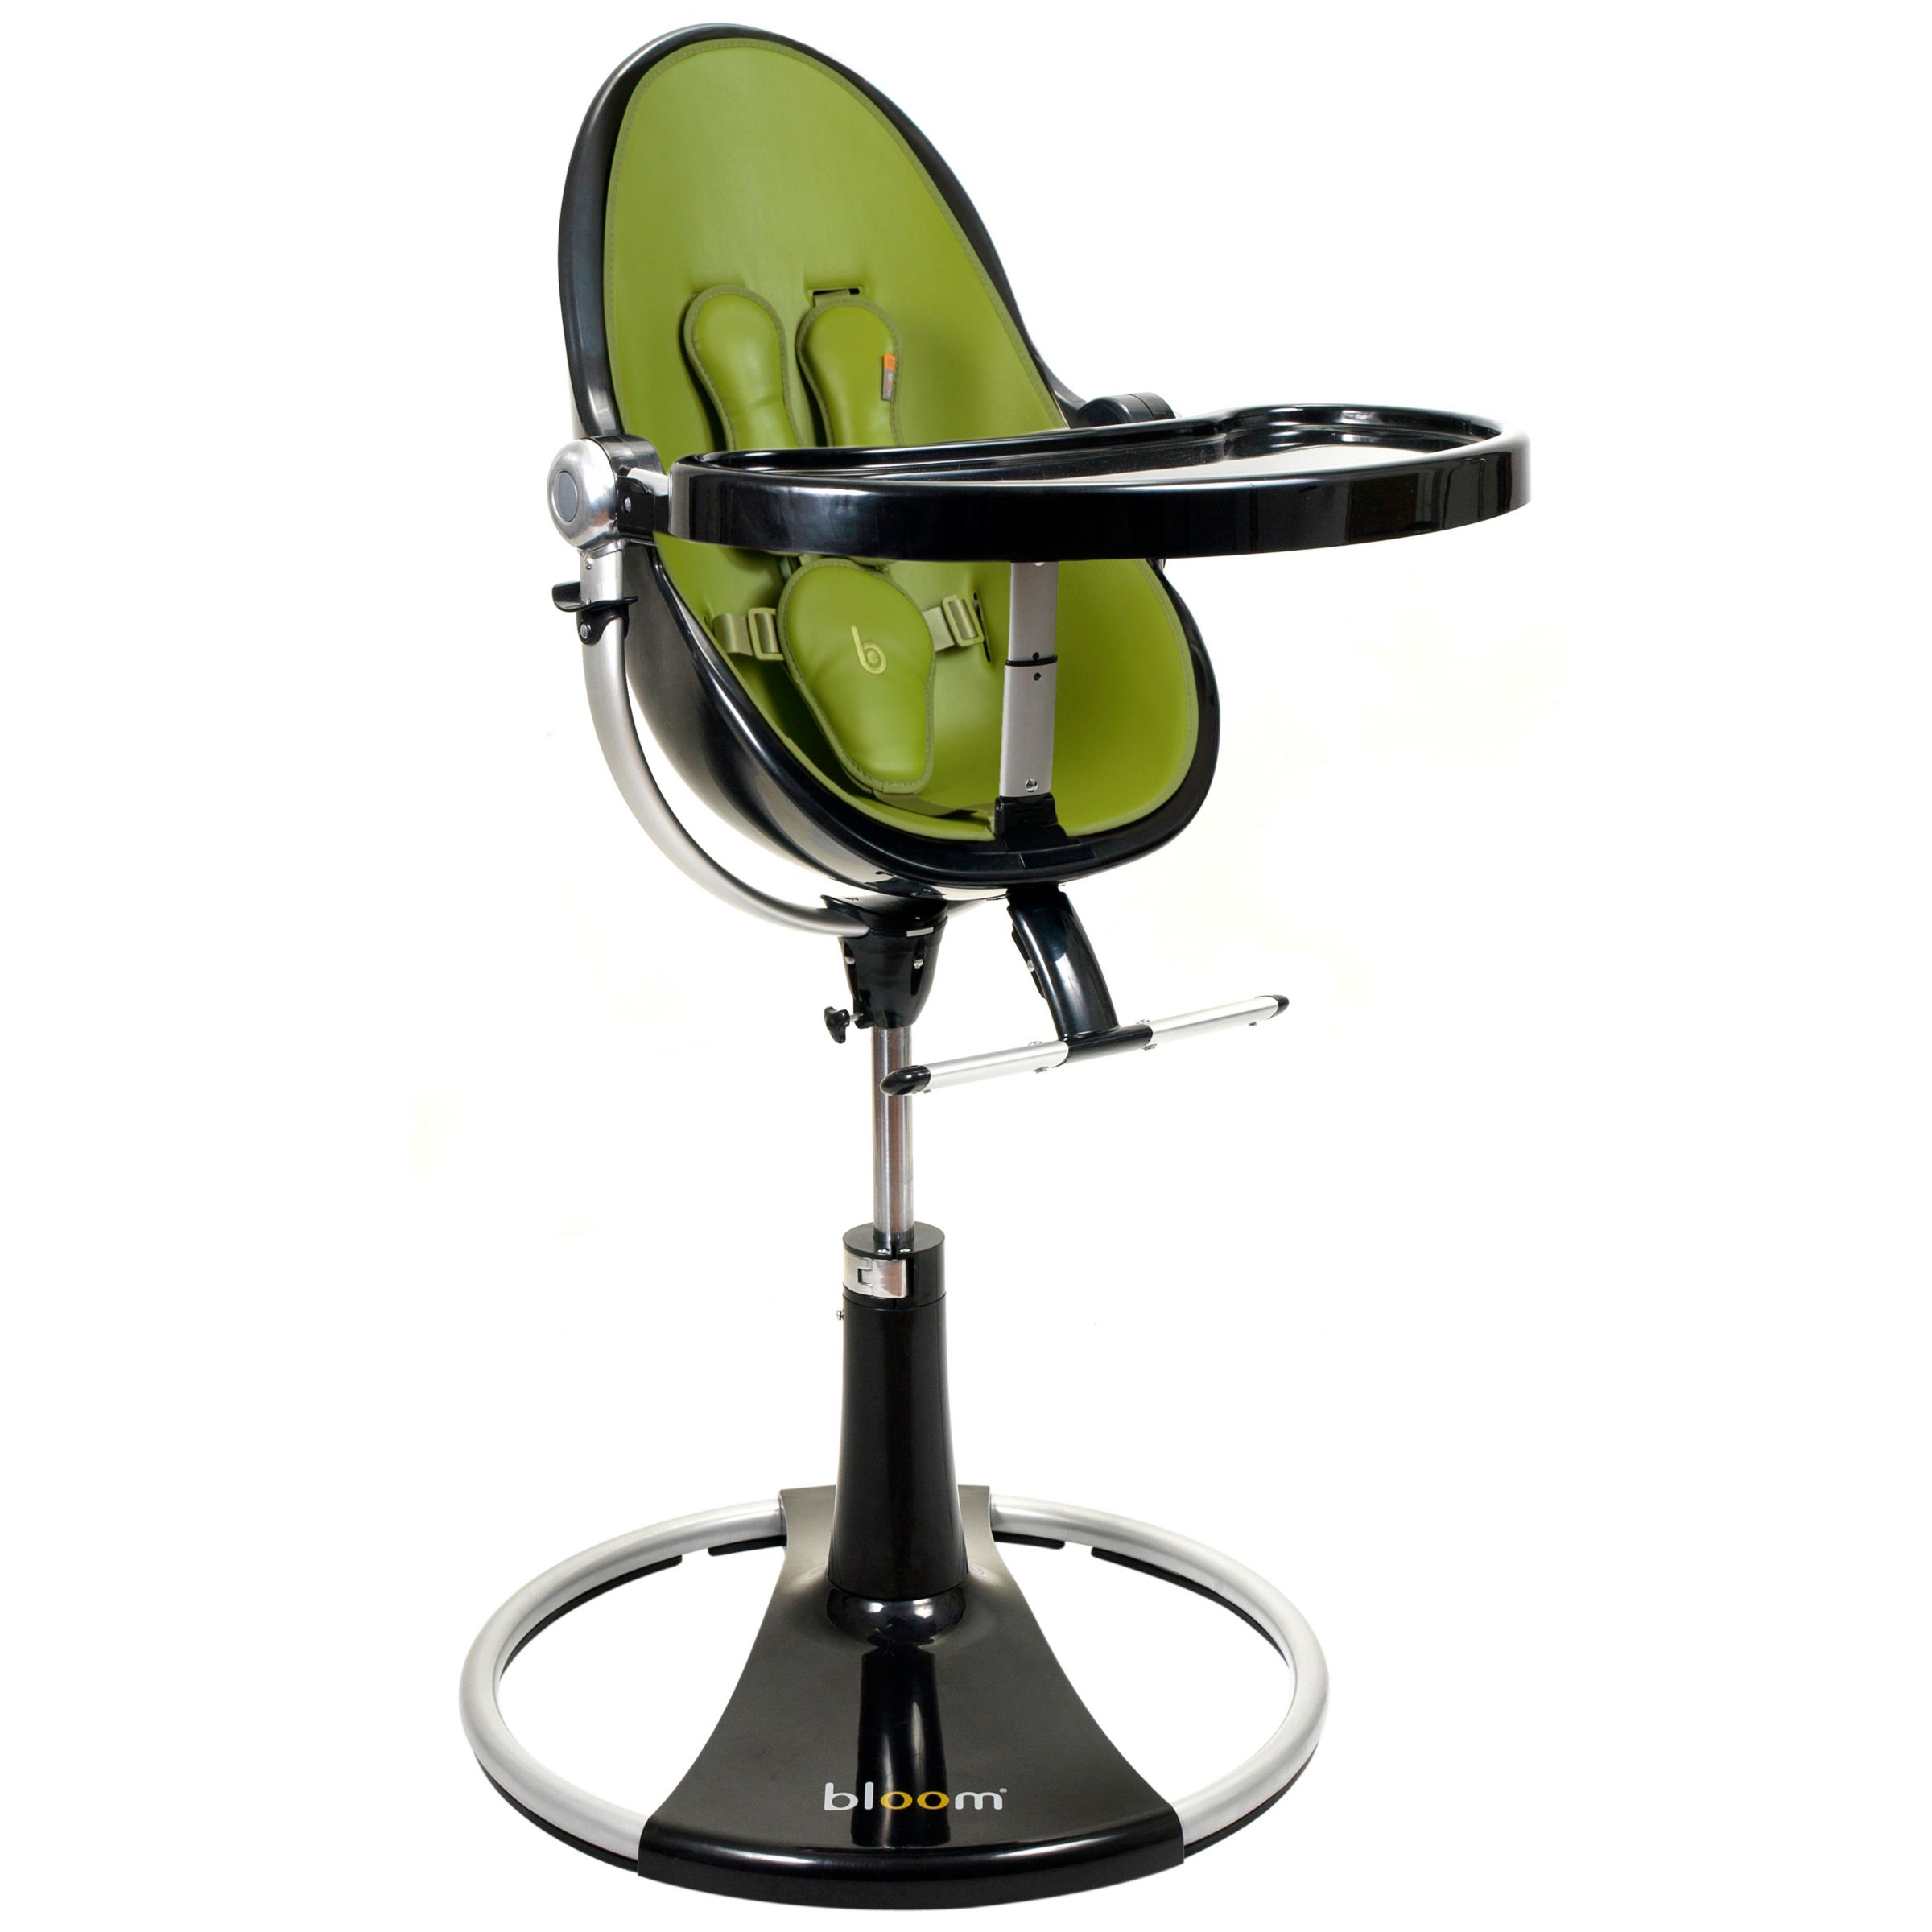 bloom Fresco Loft Contemporary Leatherette Baby Chair, Ebony Black with Gala Green at John Lewis